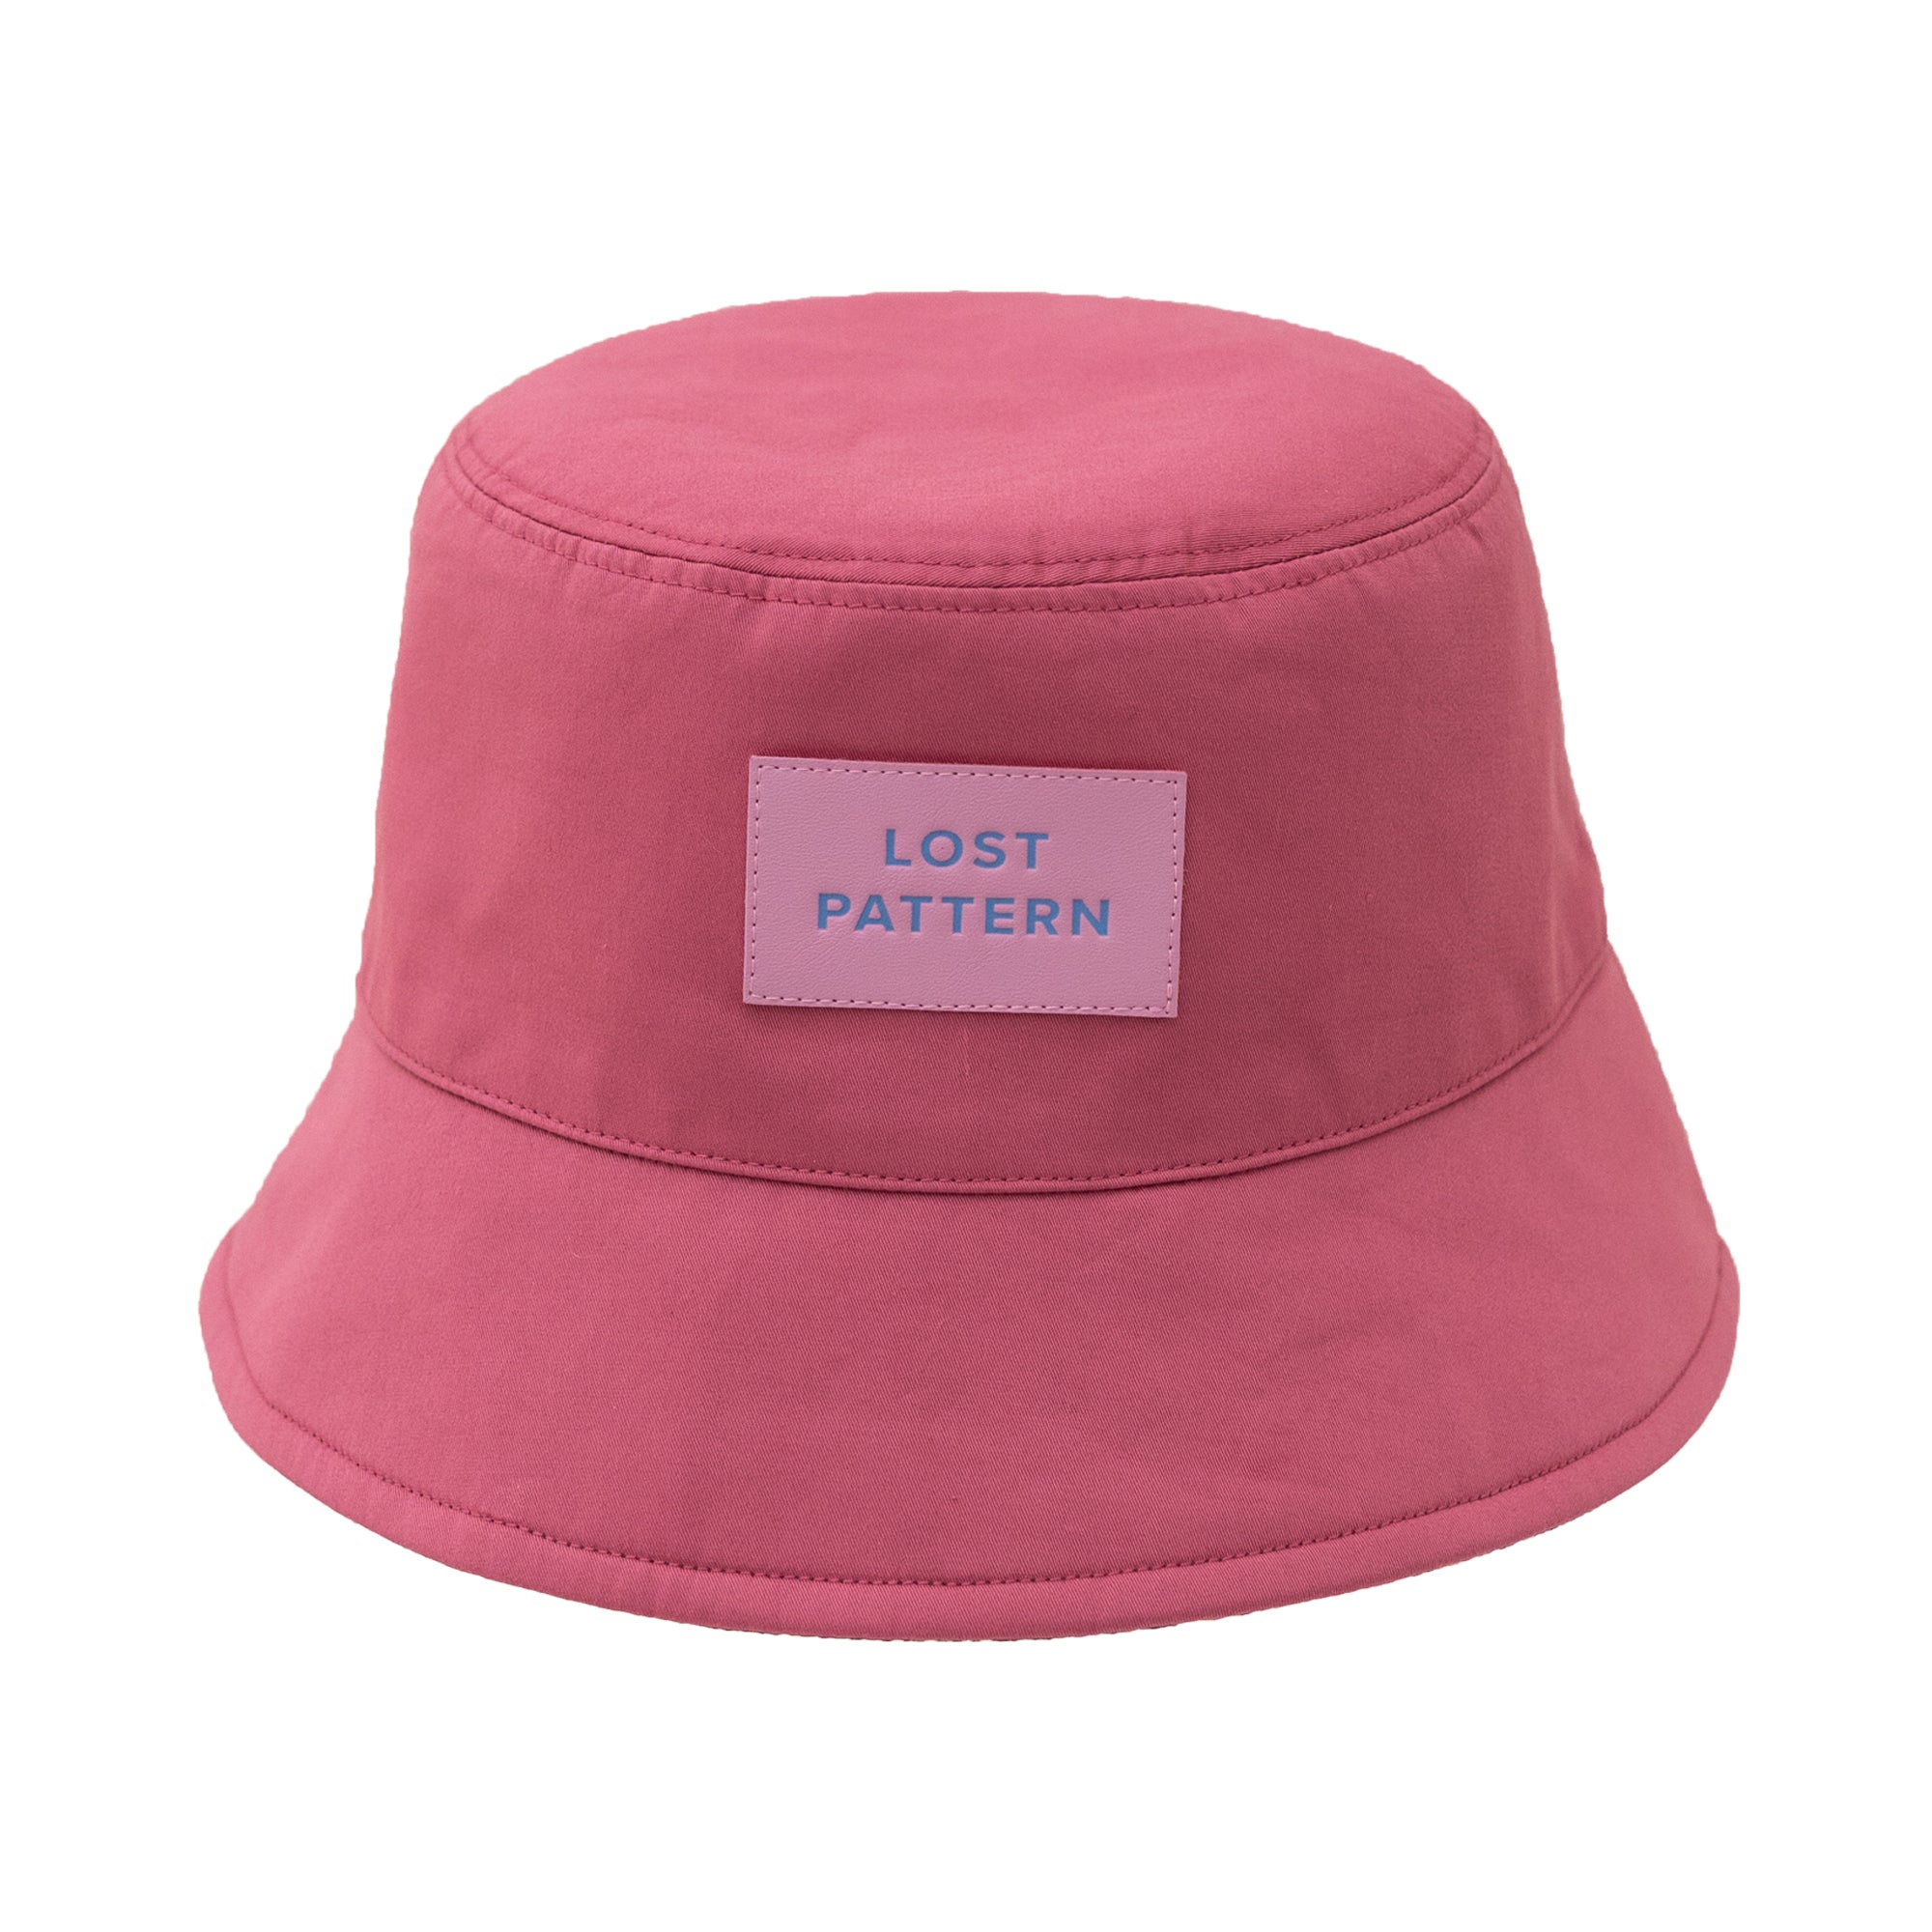 "Forest" Cotton Reversible Bucket Hat - Rose Red - Rose red - LOST PATTERN